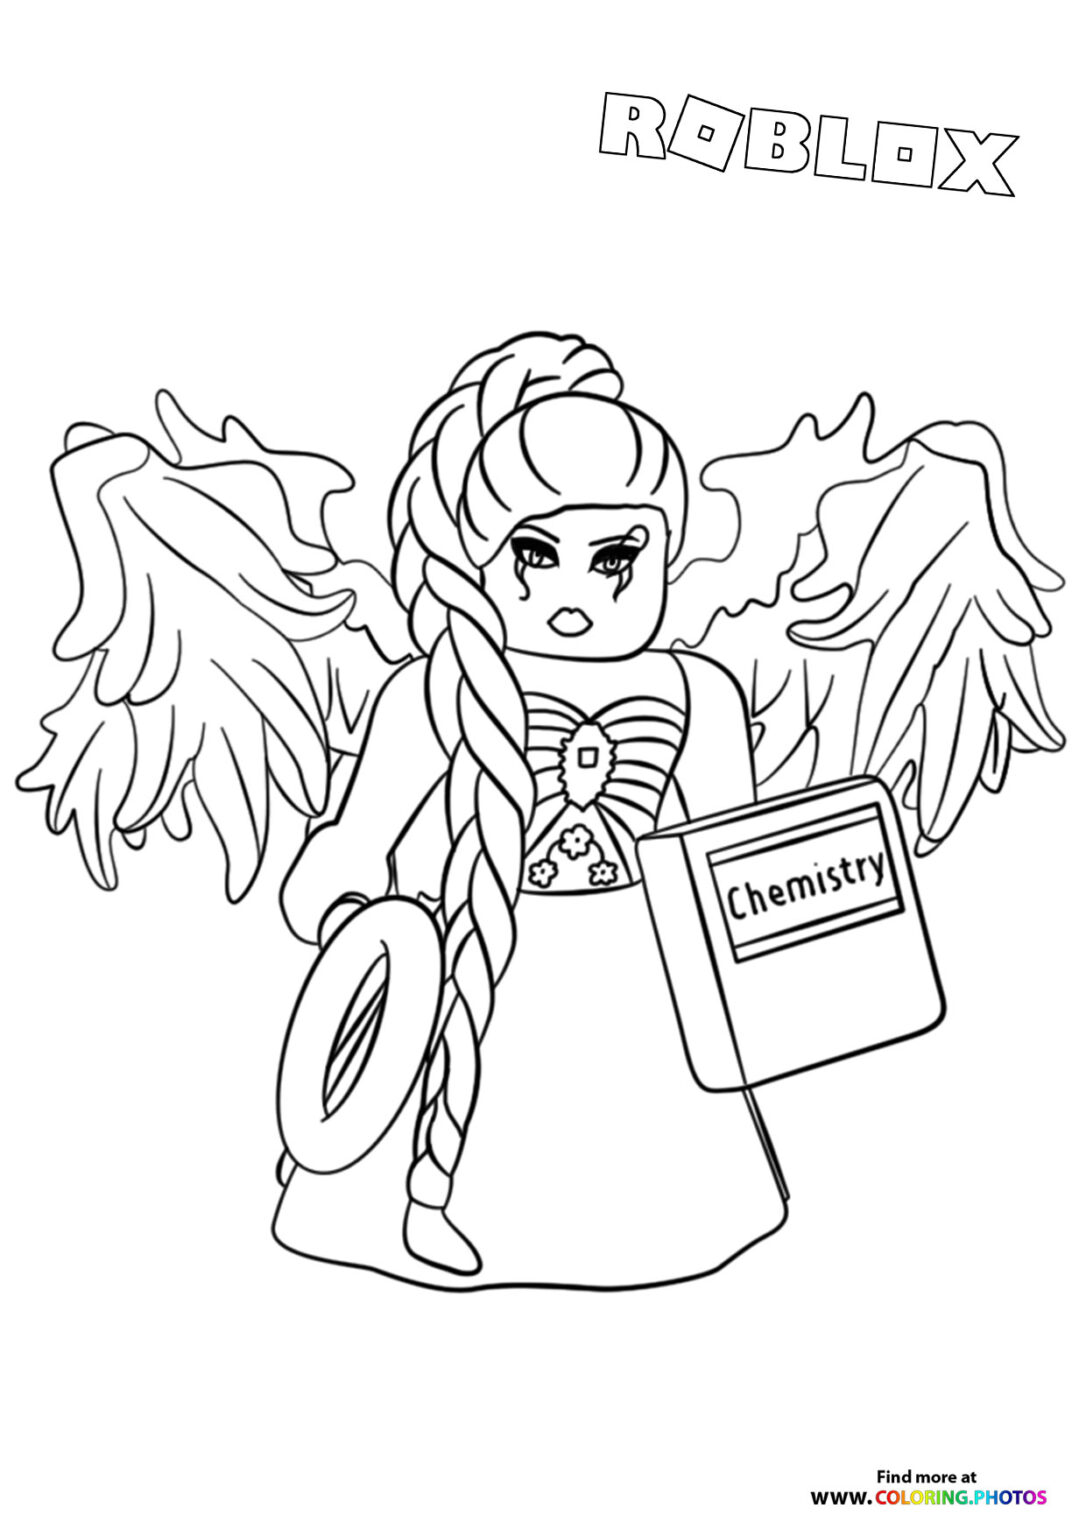 Girl with wings - Coloring Pages for kids